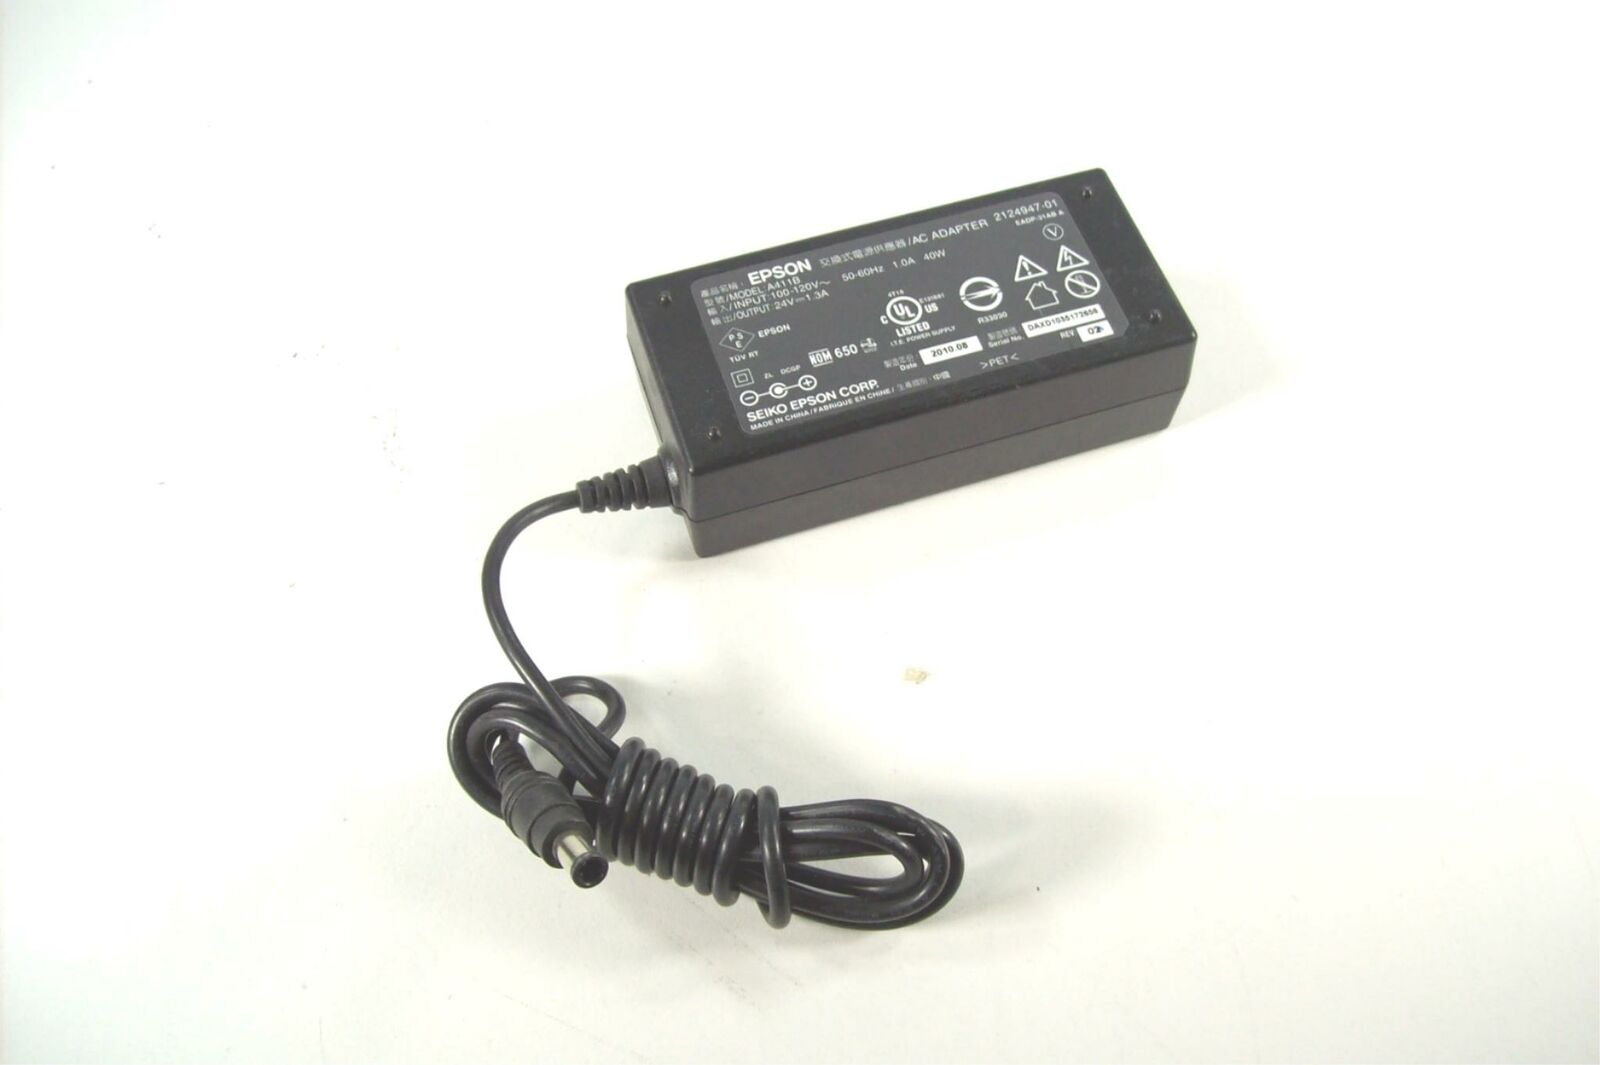 Genuine Epson A411B 24V 1.3A 40W Scanner Power Supply Adapter w/ Power Cord Brand: Epson Compatible Brand: For Epson